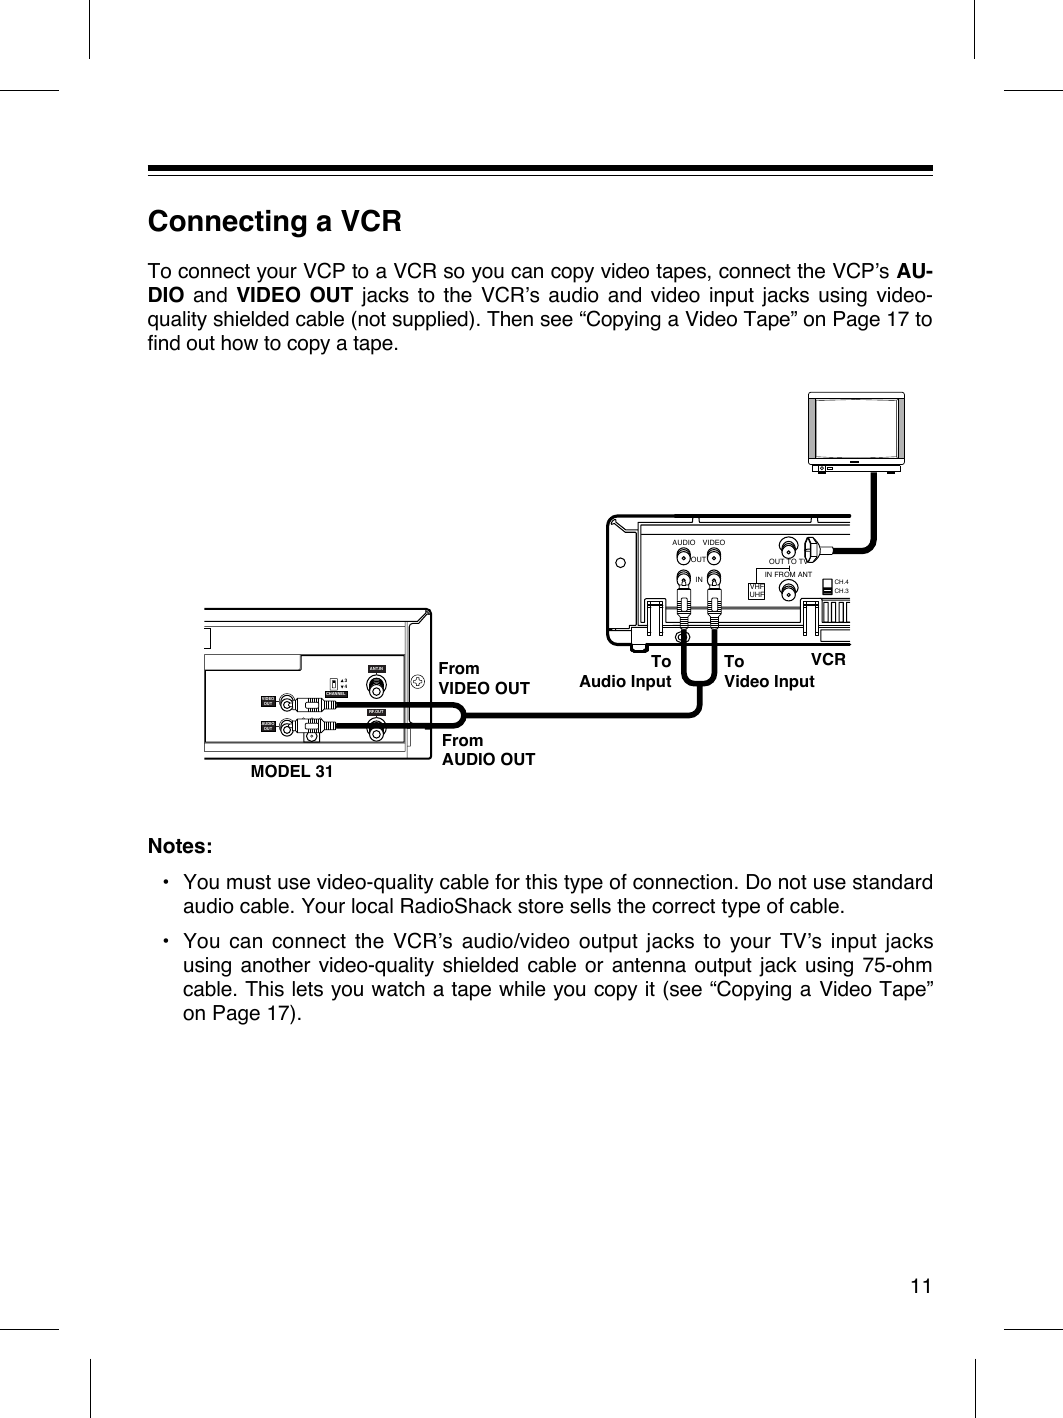 Connecting a VCRTo connect your VCP to a VCR so you can copy video tapes, connect the VCPÕs AU-DIO and VIDEO OUT jacks to the VCRÕs audio and video input jacks using video-quality shielded cable (not supplied). Then see ÒCopying a Video TapeÓ on Page 17 tofind out how to copy a tape.Notes:¥ You must use video-quality cable for this type of connection. Do not use standardaudio cable. Your local RadioShack store sells the correct type of cable.¥ You can connect the VCRÕs audio/video output jacks to your TVÕs input jacksusing another video-quality shielded cable or antenna output jack using 75-ohmcable. This lets you watch a tape while you copy it (see ÒCopying a Video TapeÓon Page 17).113DC  IN  12V4CHANNELRF.OUTANT.INVIDEOOUTAUDIOOUTCH.4CH.3OUT TO TVIN FROM ANTINOUTAUDIO VIDEOVHFUHFFrom VIDEO OUTFrom AUDIO OUTToAudio InputToVideo InputMODEL 31VCR